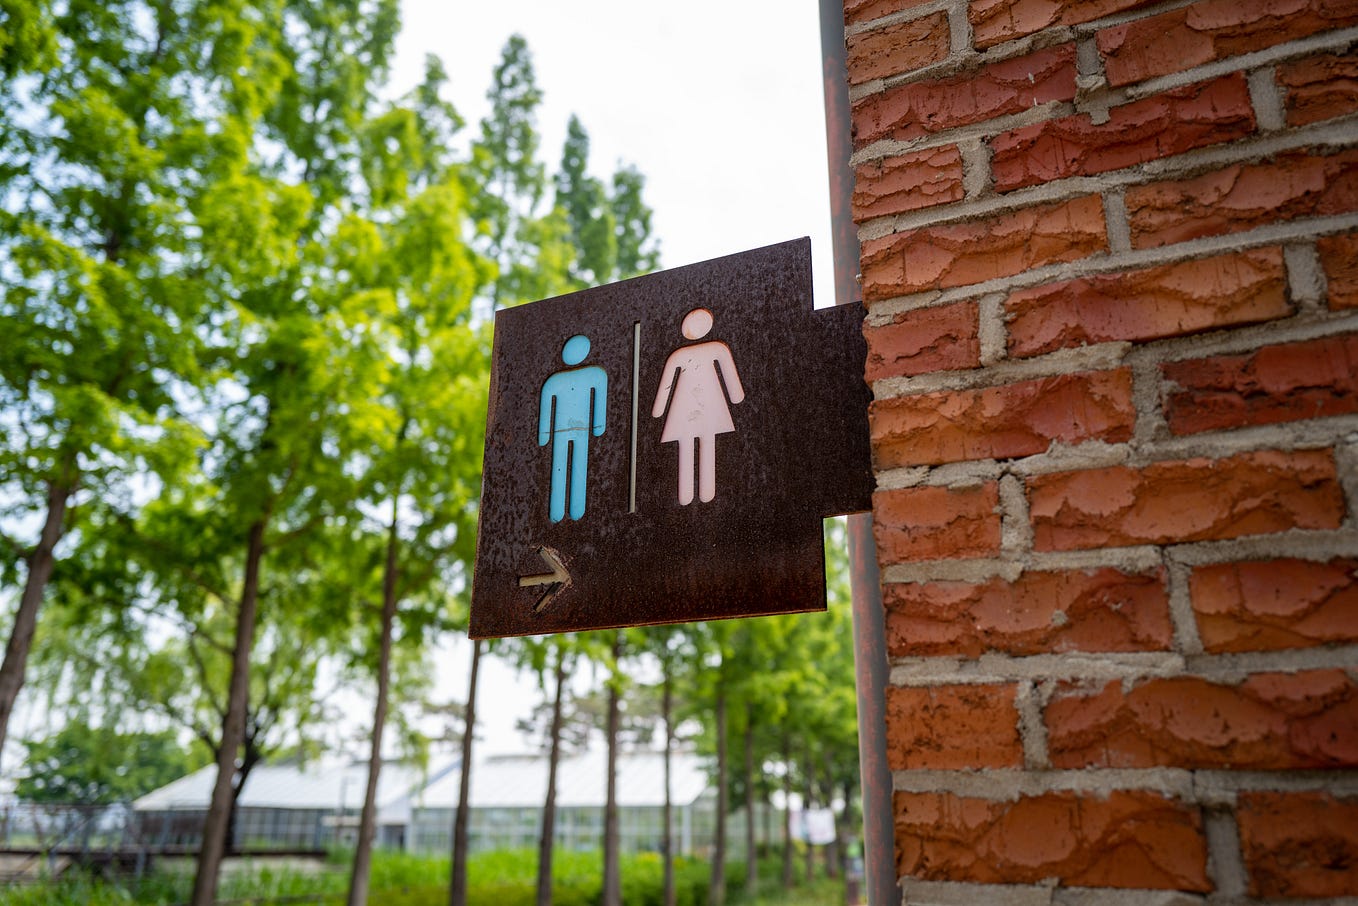 A Trans Girl Approached Me in the Ladies’ Bathroom and It Bothered Me